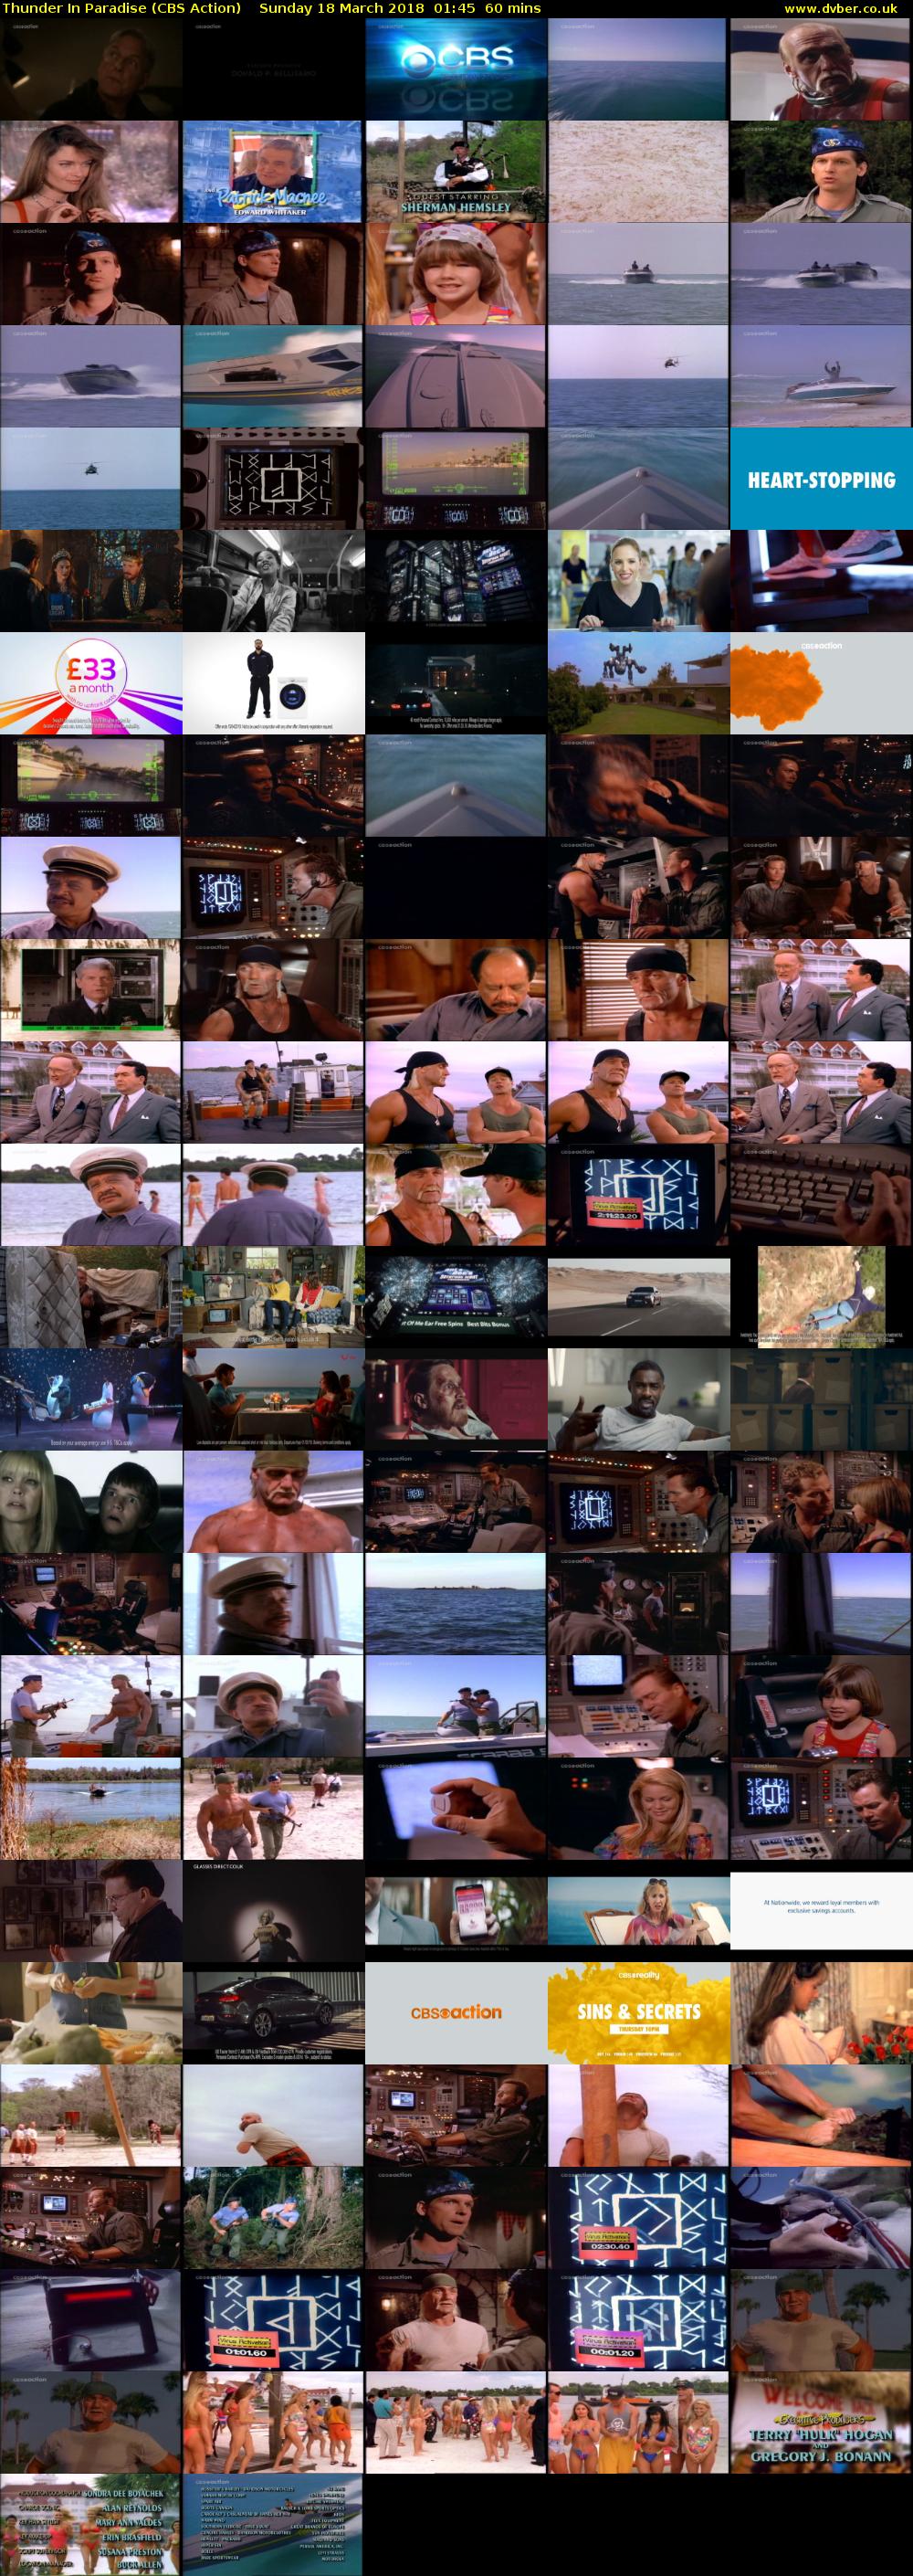 Thunder In Paradise (CBS Action) Sunday 18 March 2018 01:45 - 02:45